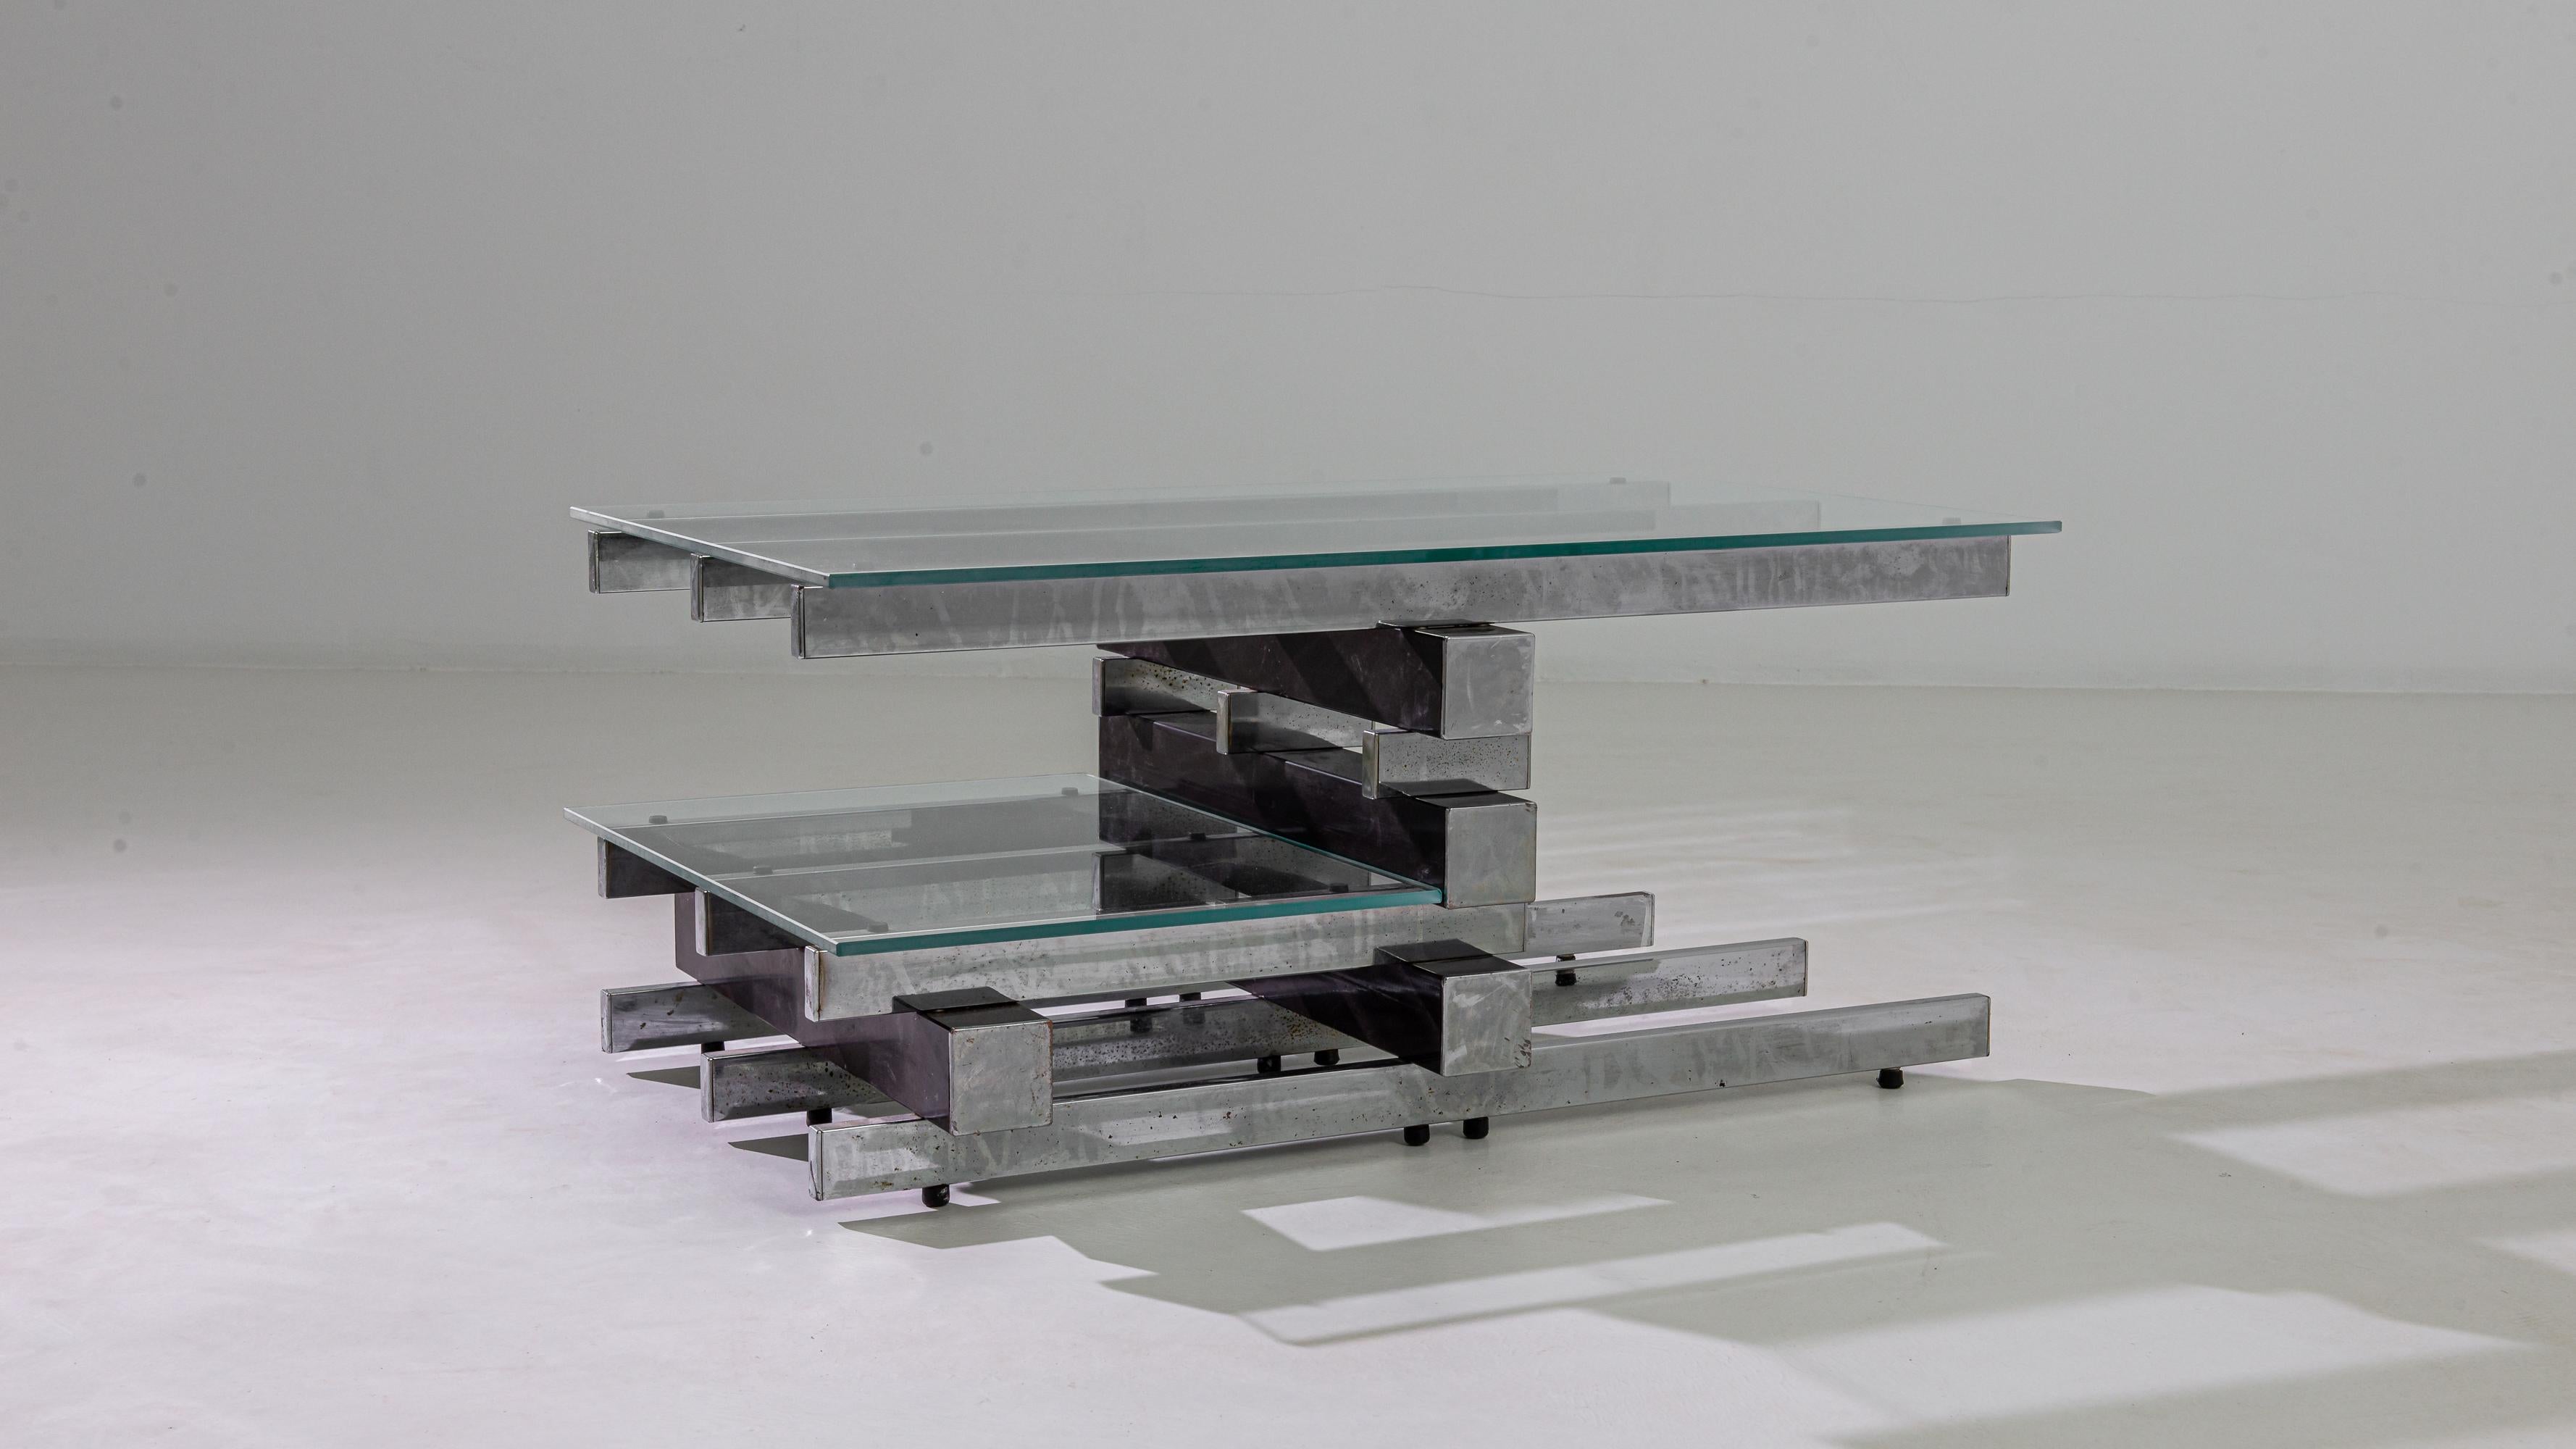 This vintage coffee table made in Italy in the 20th century boasts a unique metal base structure that is built with blocks of plated steel placed on top of each other like Jenga pieces. The lower shelf encourages aesthetic asymmetry, enhancing the